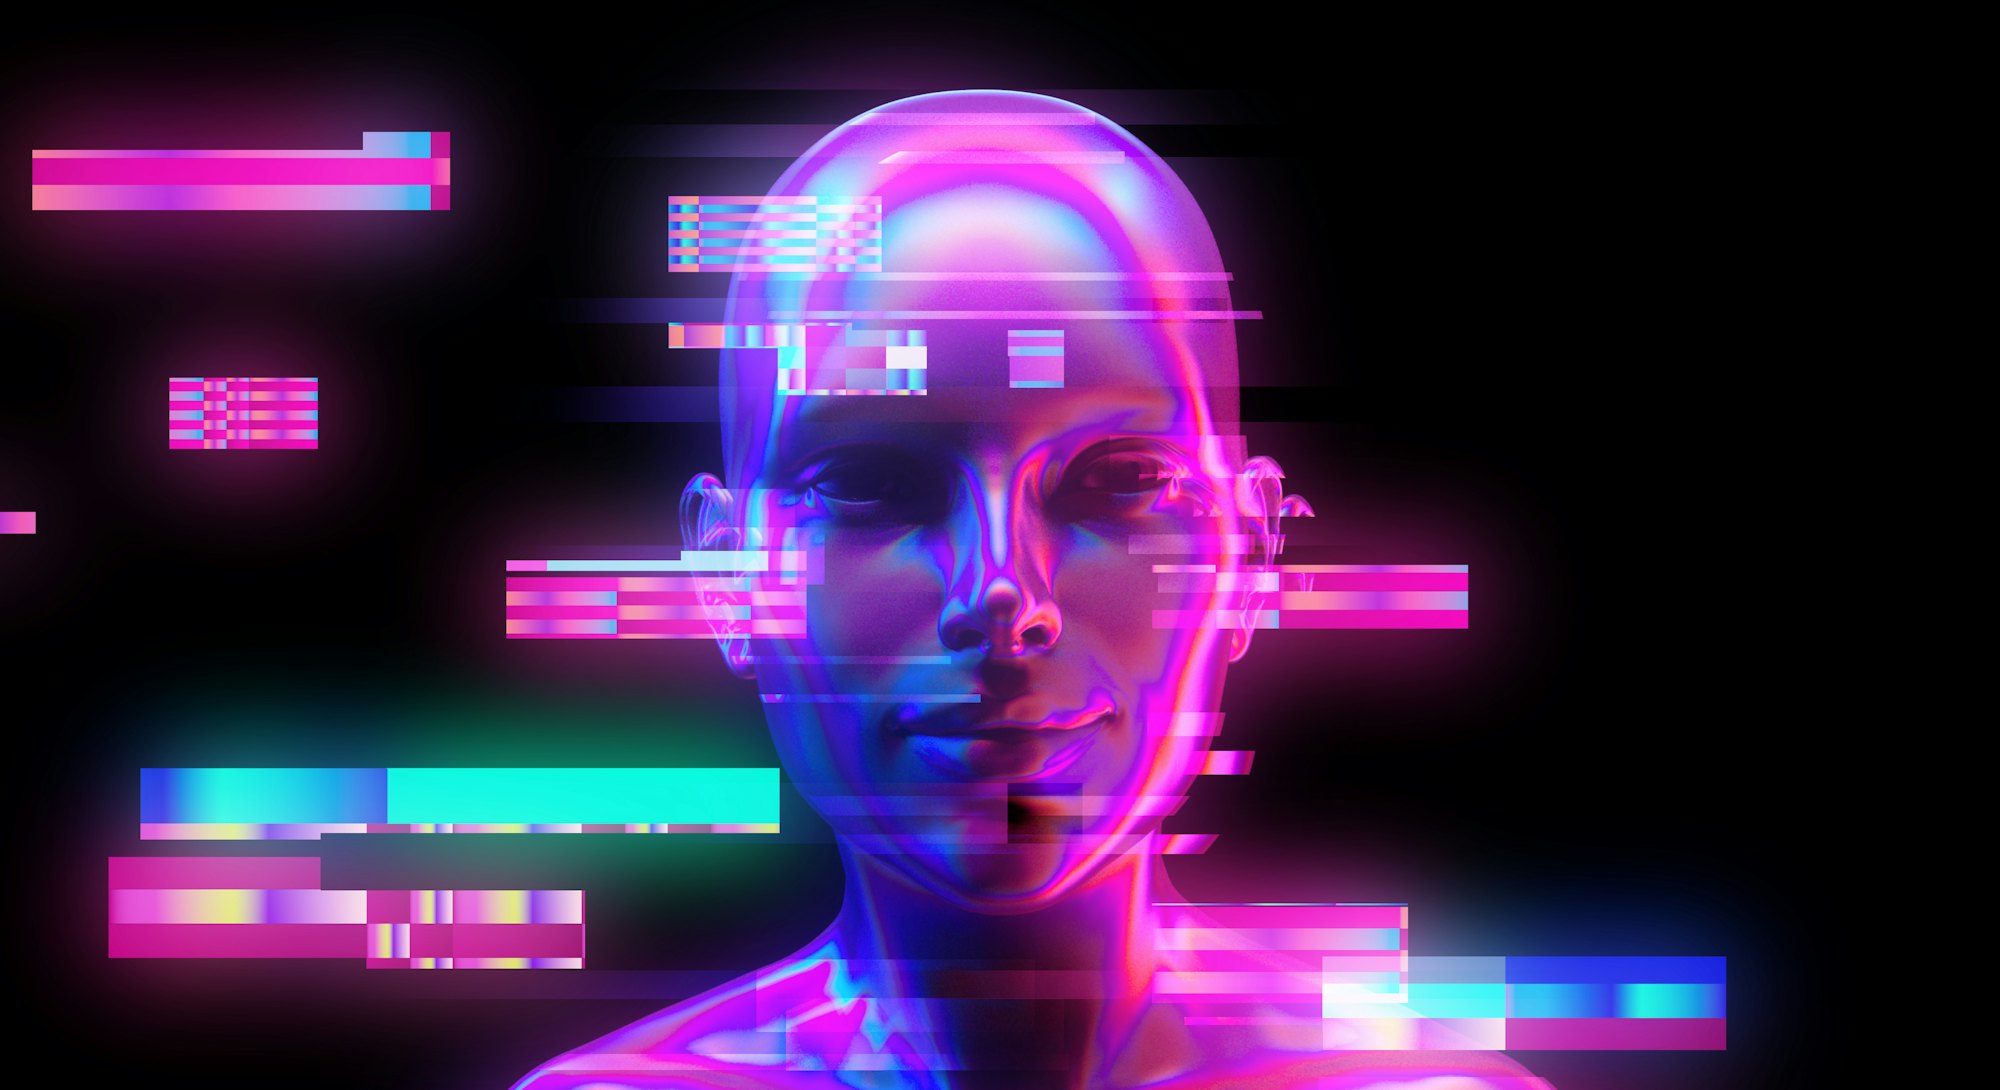 3D rendering illustration of artificial human bust sculpture in neon lights with digital glitch effe...